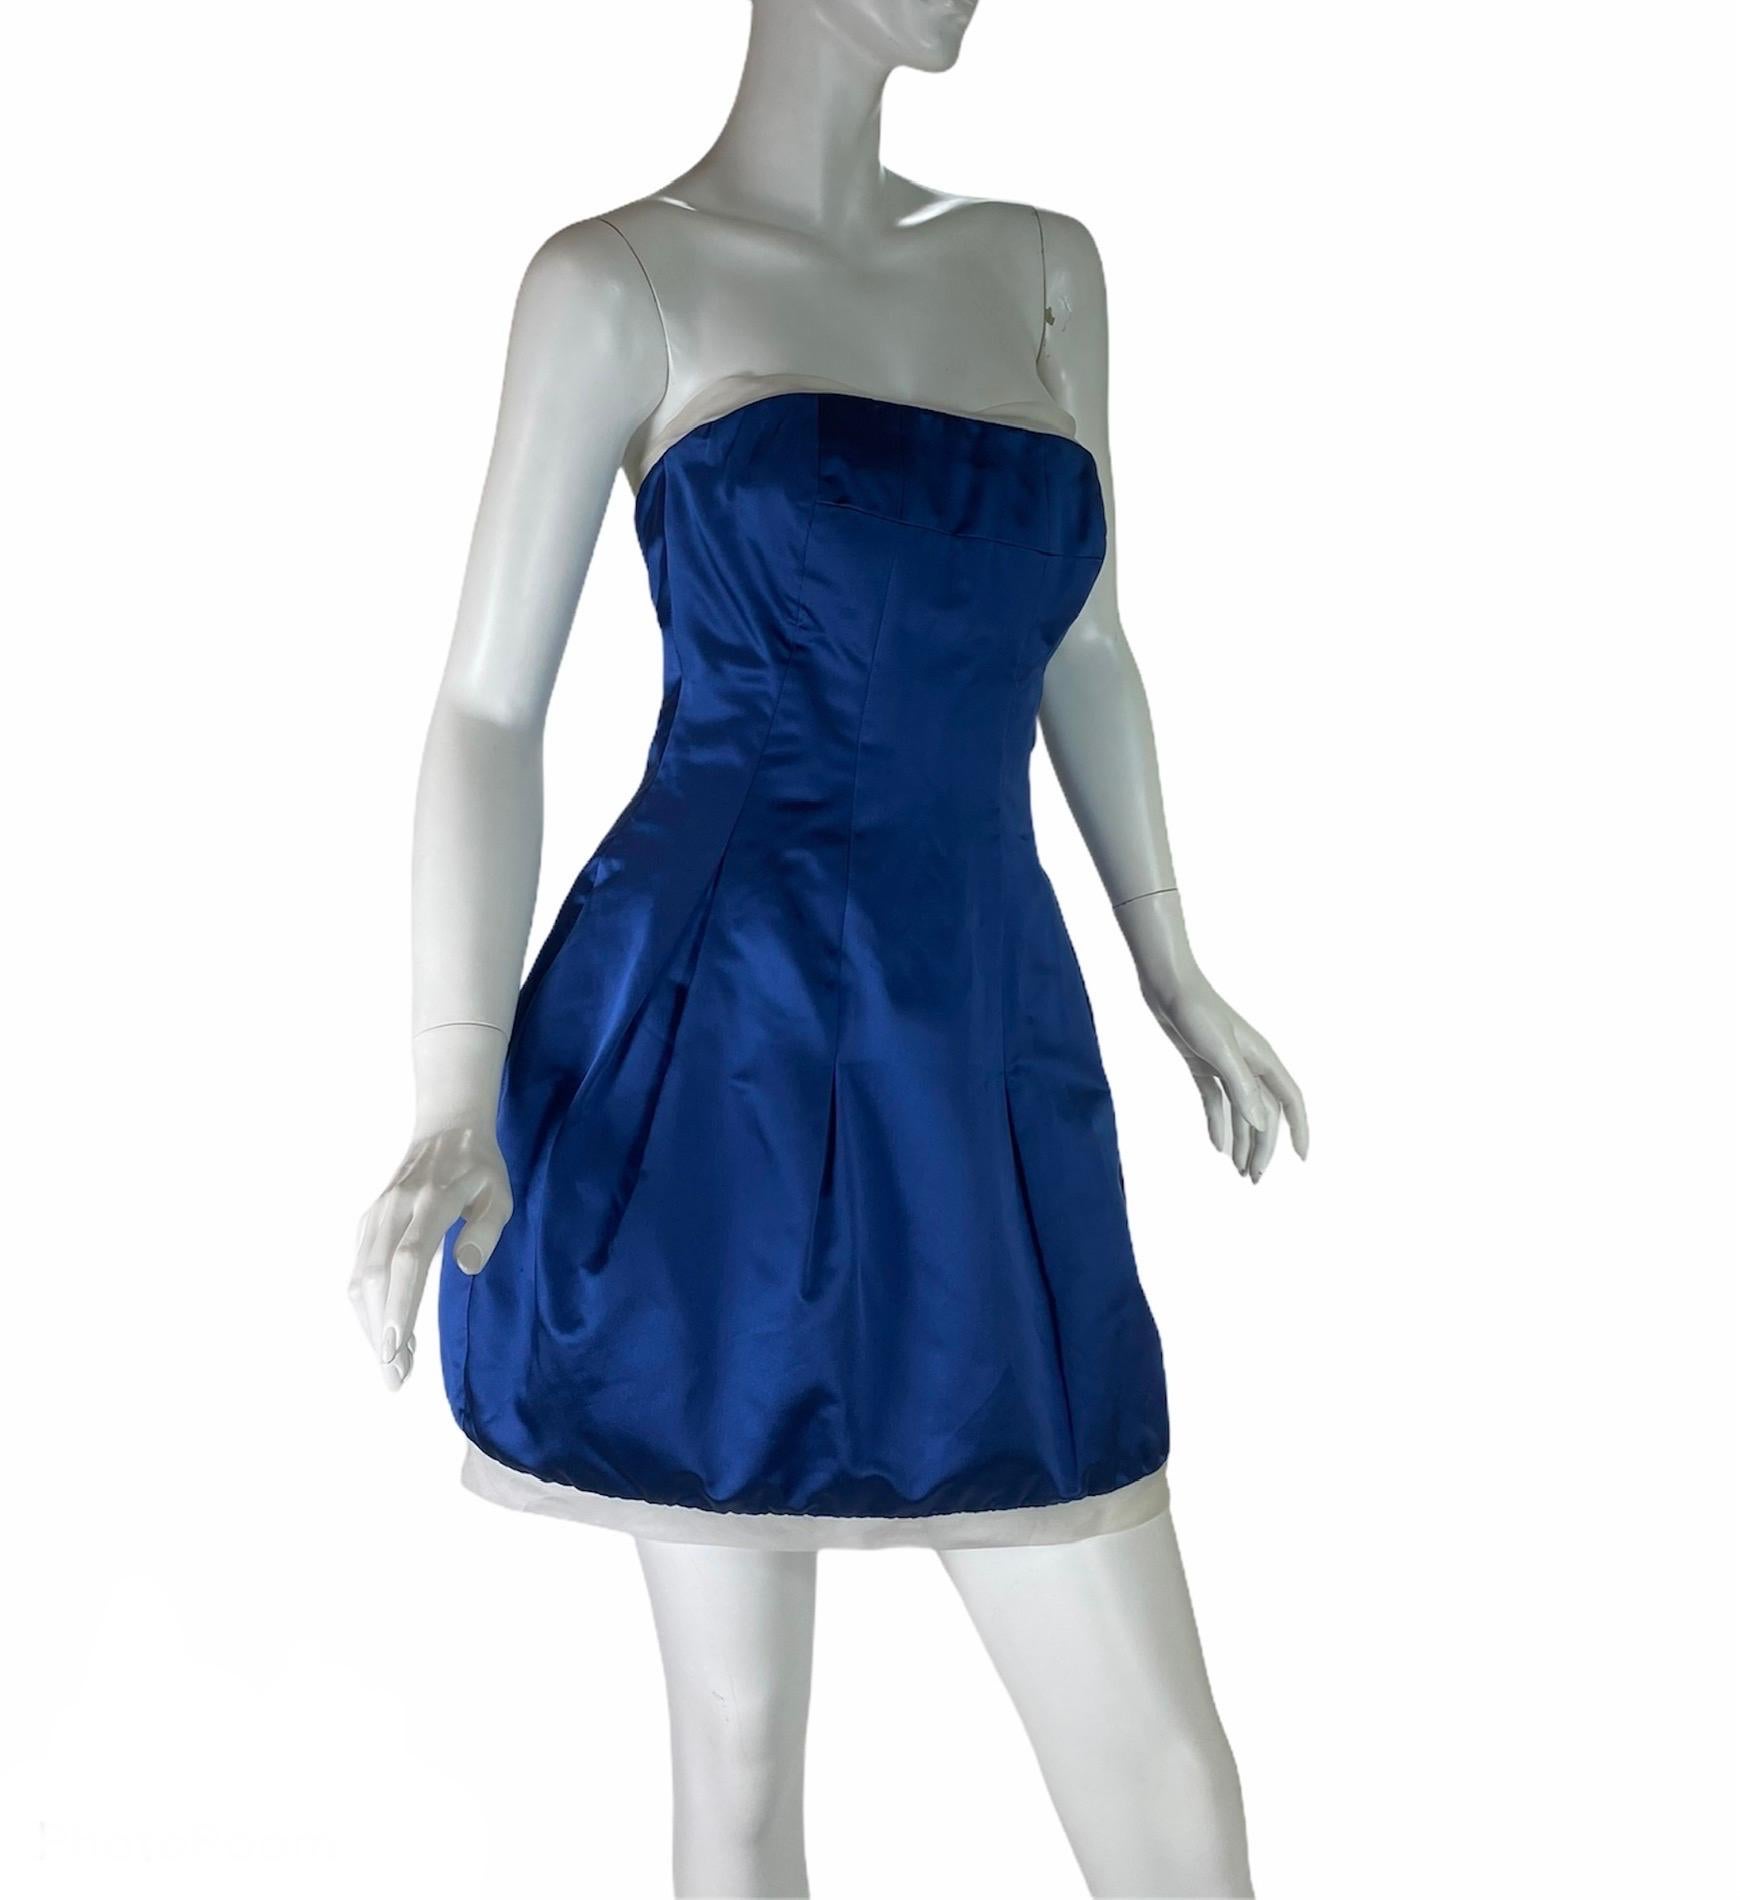 Alexander McQueen Silk Blue Mini Dress
2008 Collection
Italian size 40
100% Silk, Inner Corset, Pleated Skirt, White Trim, Fully Lined, Back Zip Closure.
Measurements: Length - 25 inches ( under the arm and down), Bust - 32/33